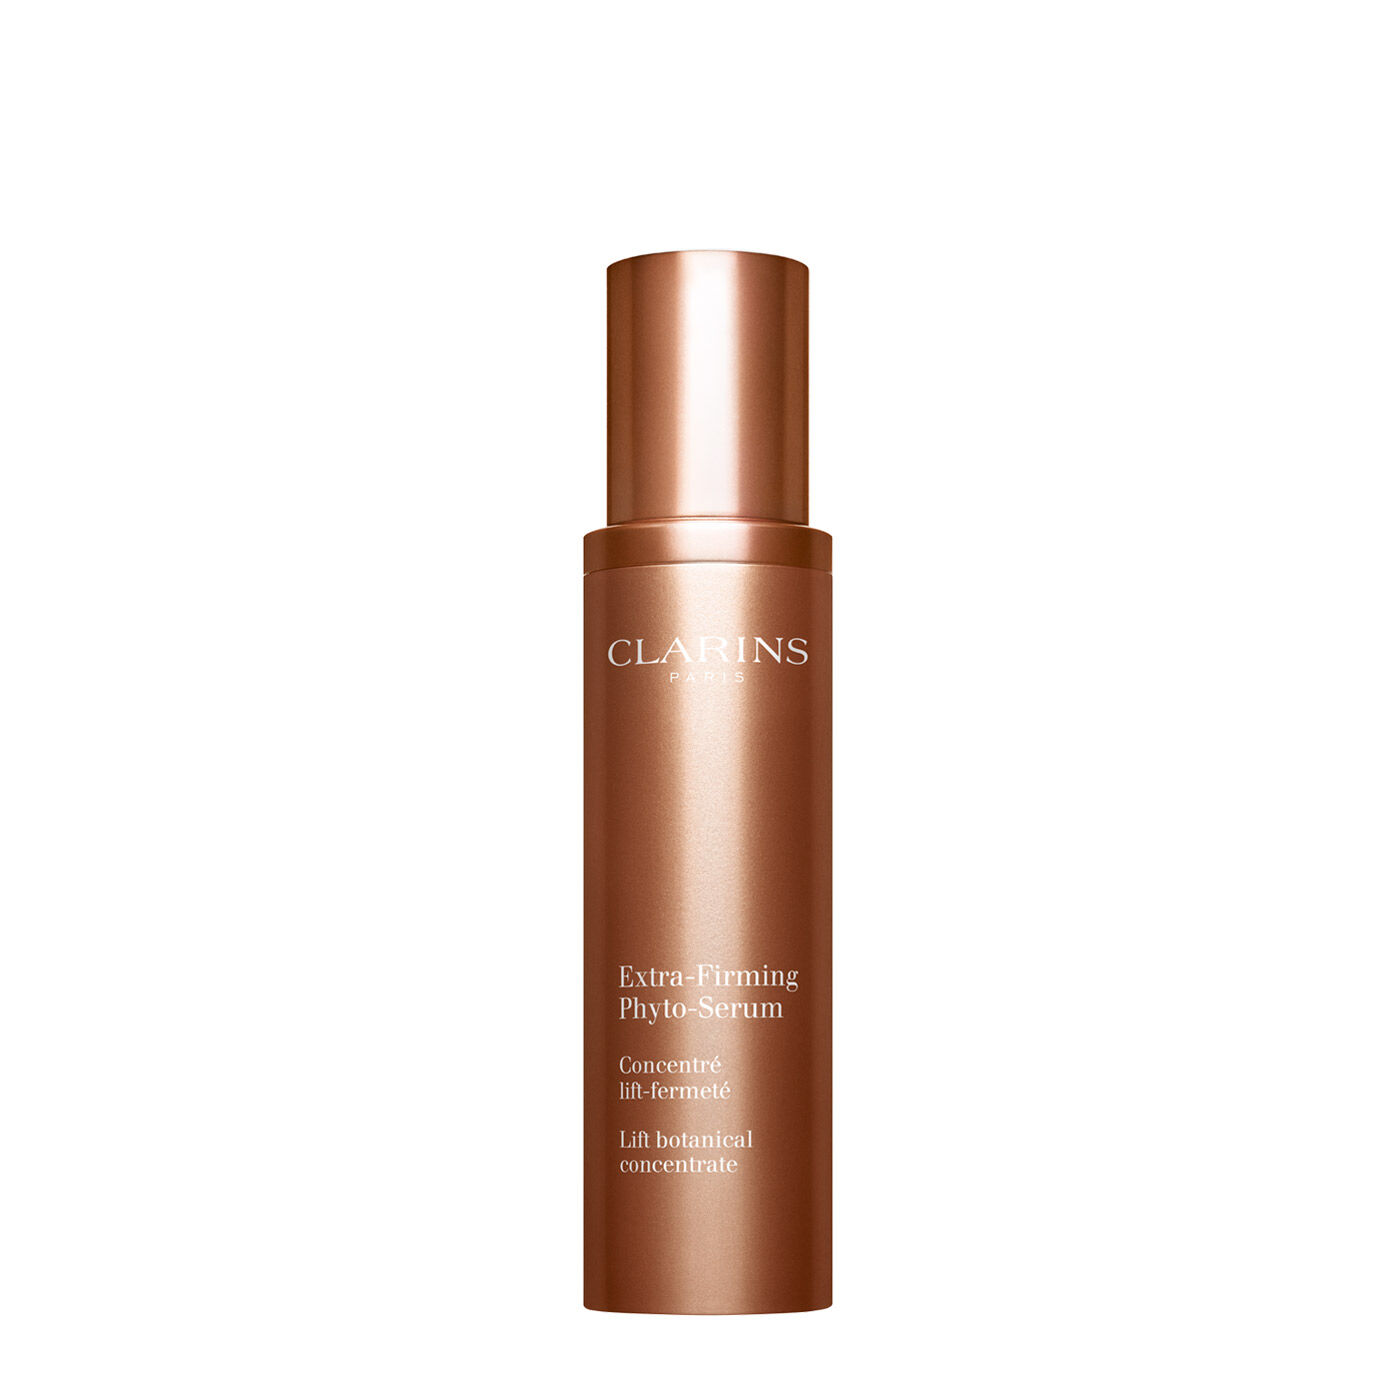 Clarins Extra-firming Phyto-serum In White